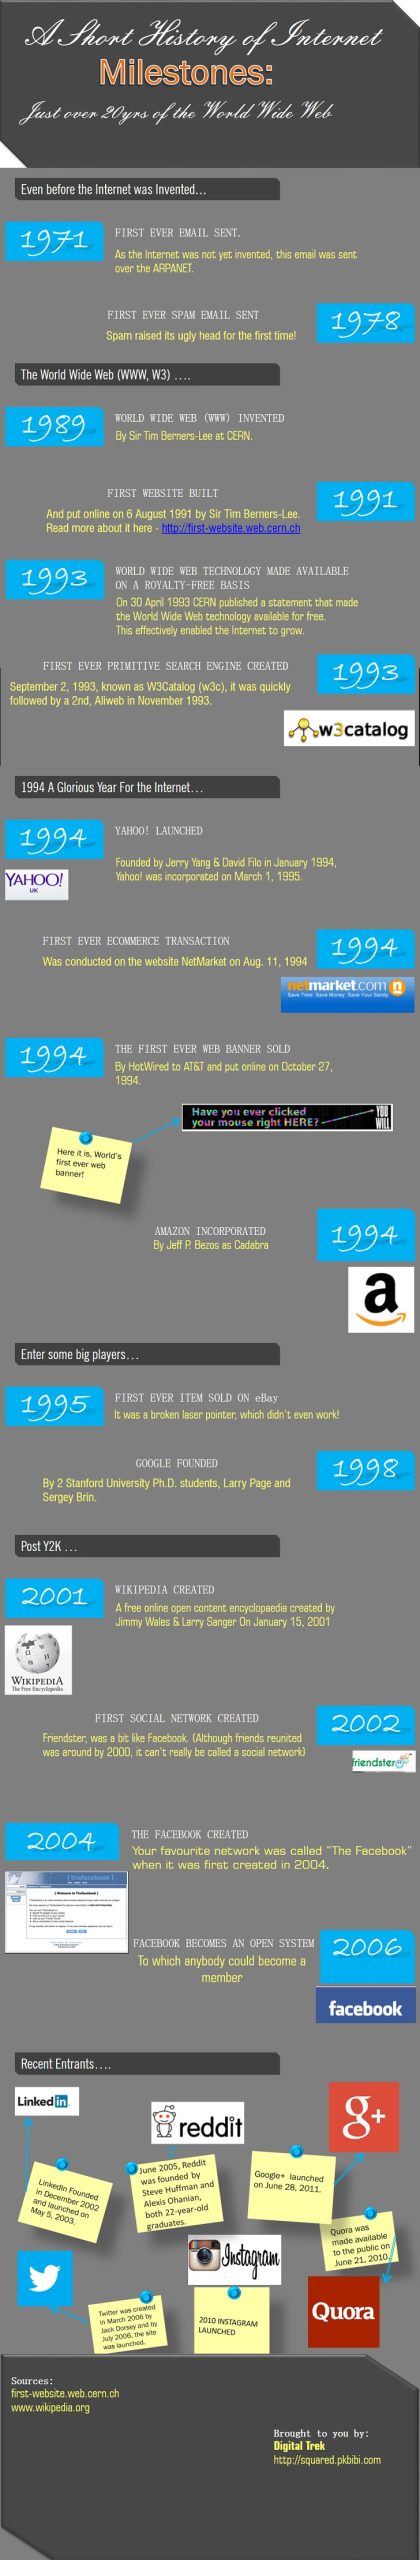 History of the Internet Infographic